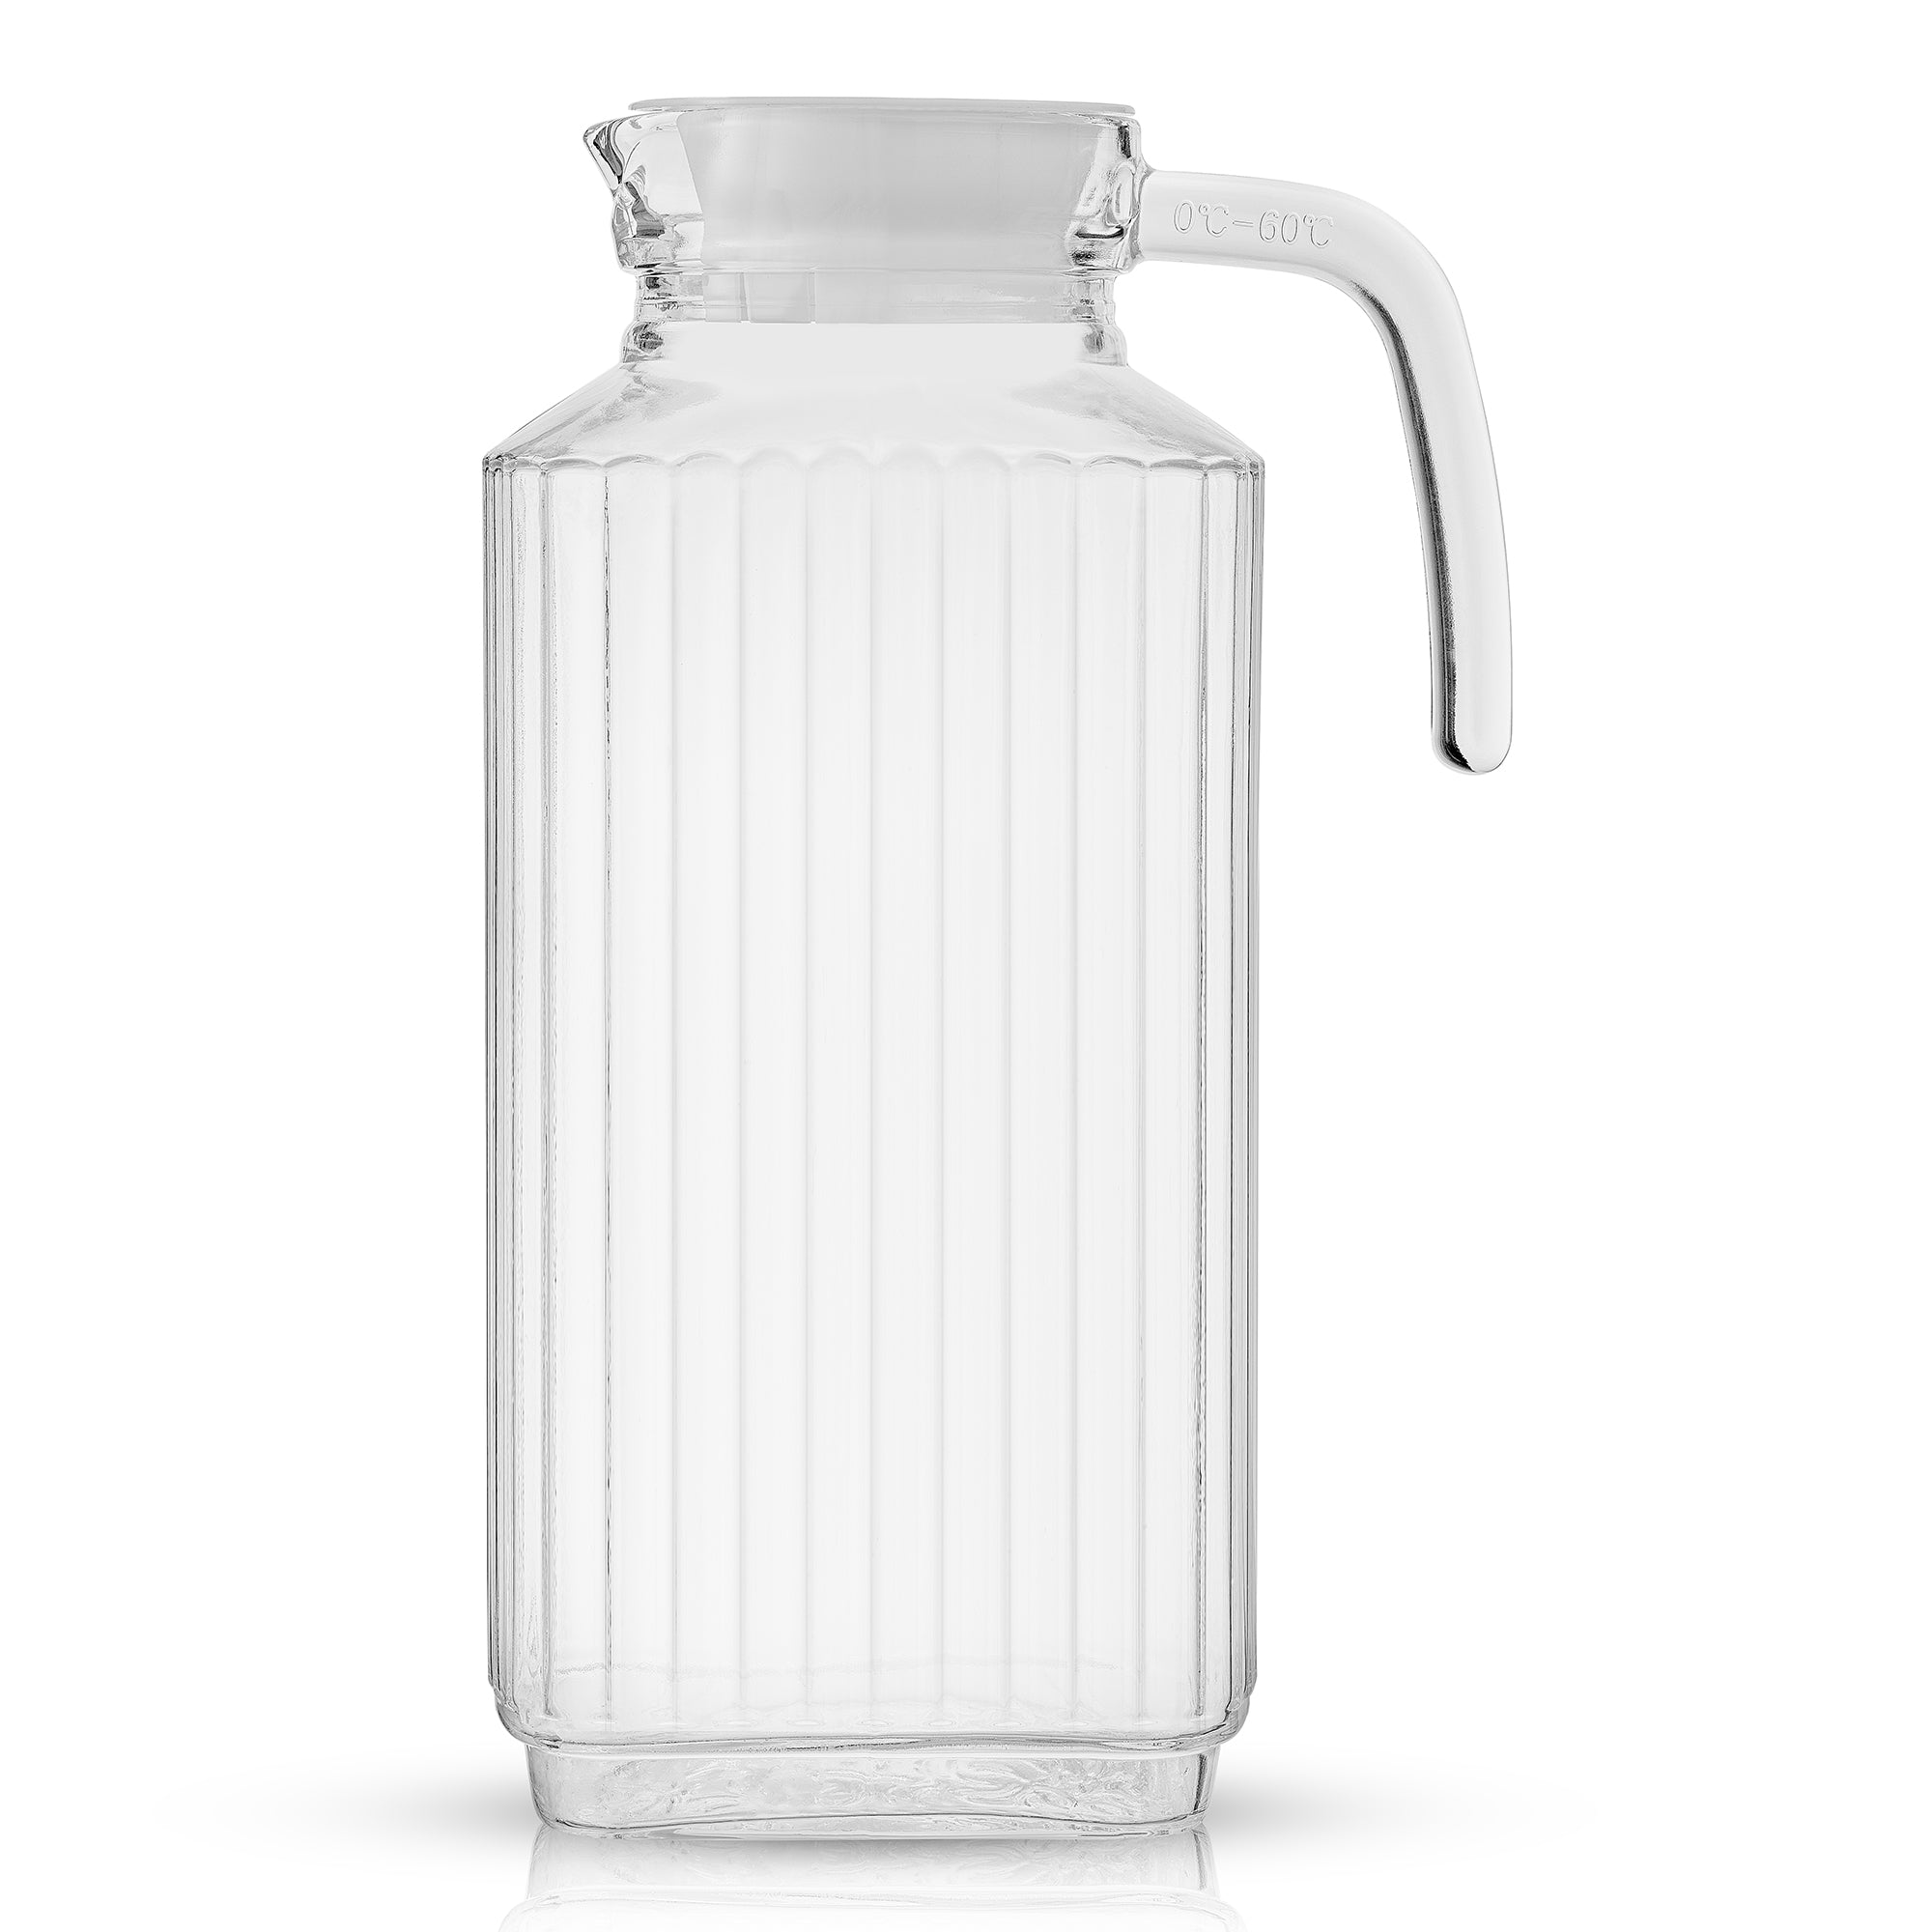 A JoyJolt Beverage Serveware Glass Pitcher, a 60-ounce clear glass pitcher with a handle and lid. This versatile pitcher is perfect for serving iced tea, lemonade, or other cold drinks. 